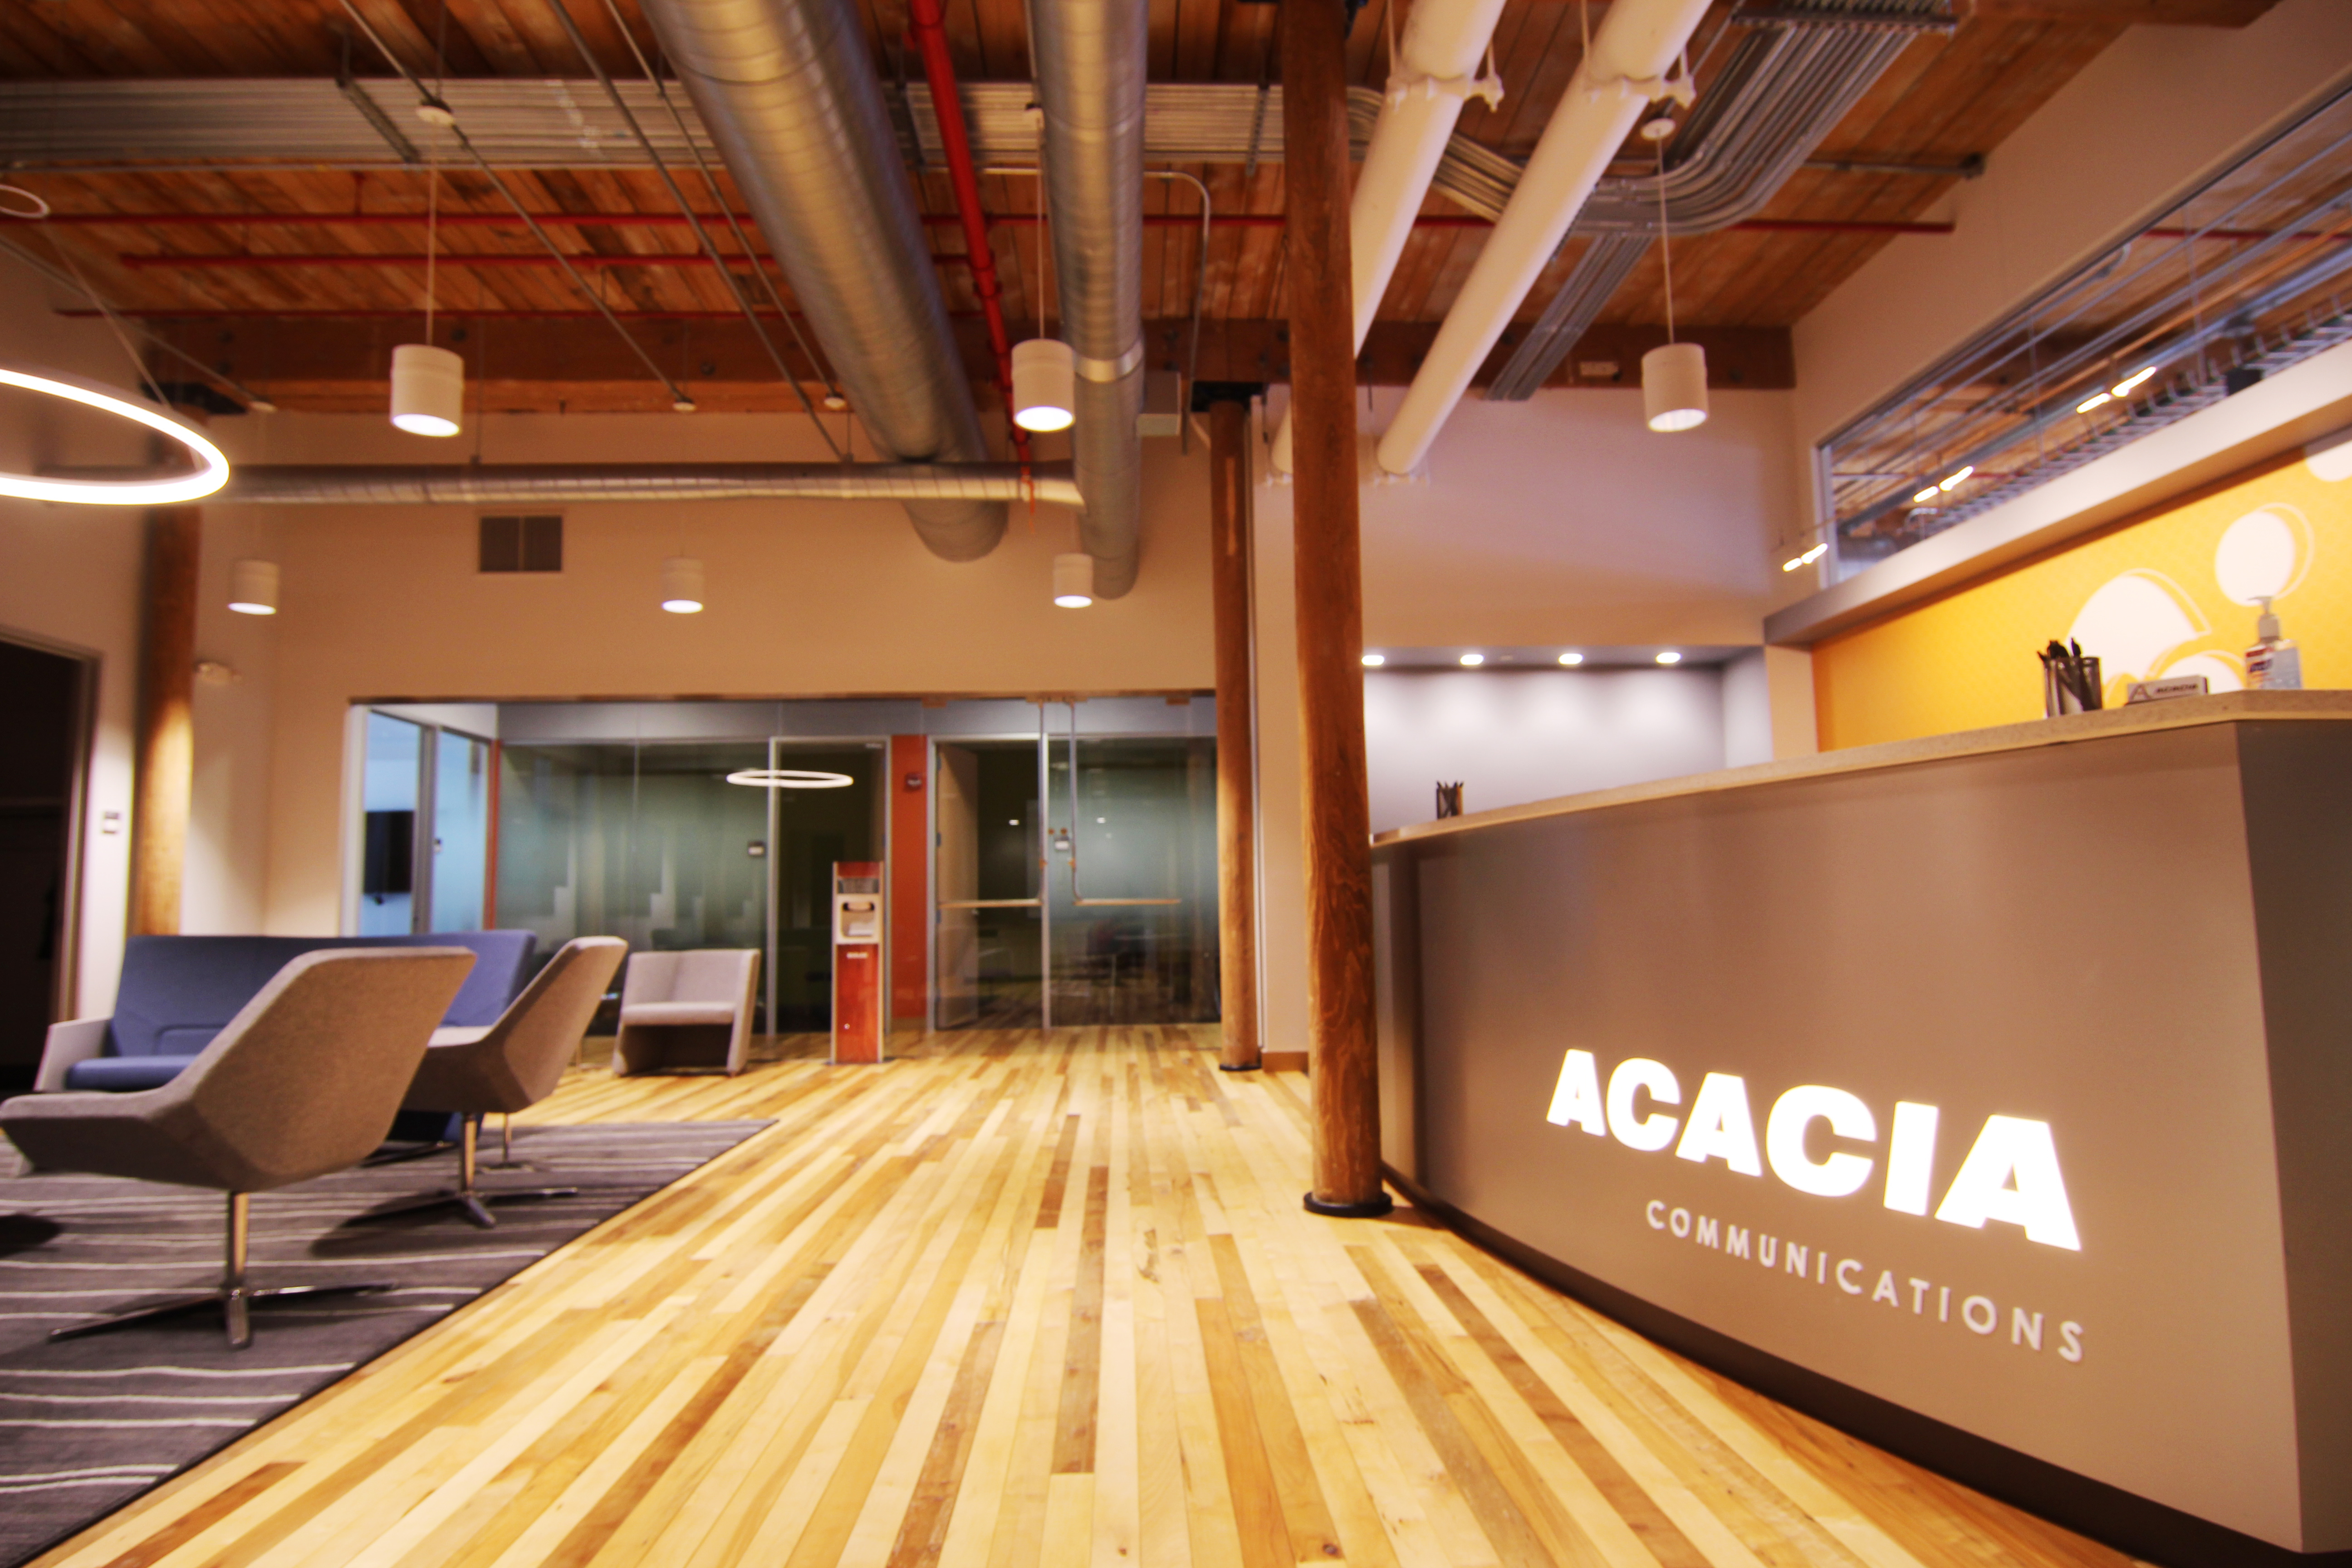 Acacia Communications Marks Company Growth With Office Expansion, 
Including Massachusetts Headquarters